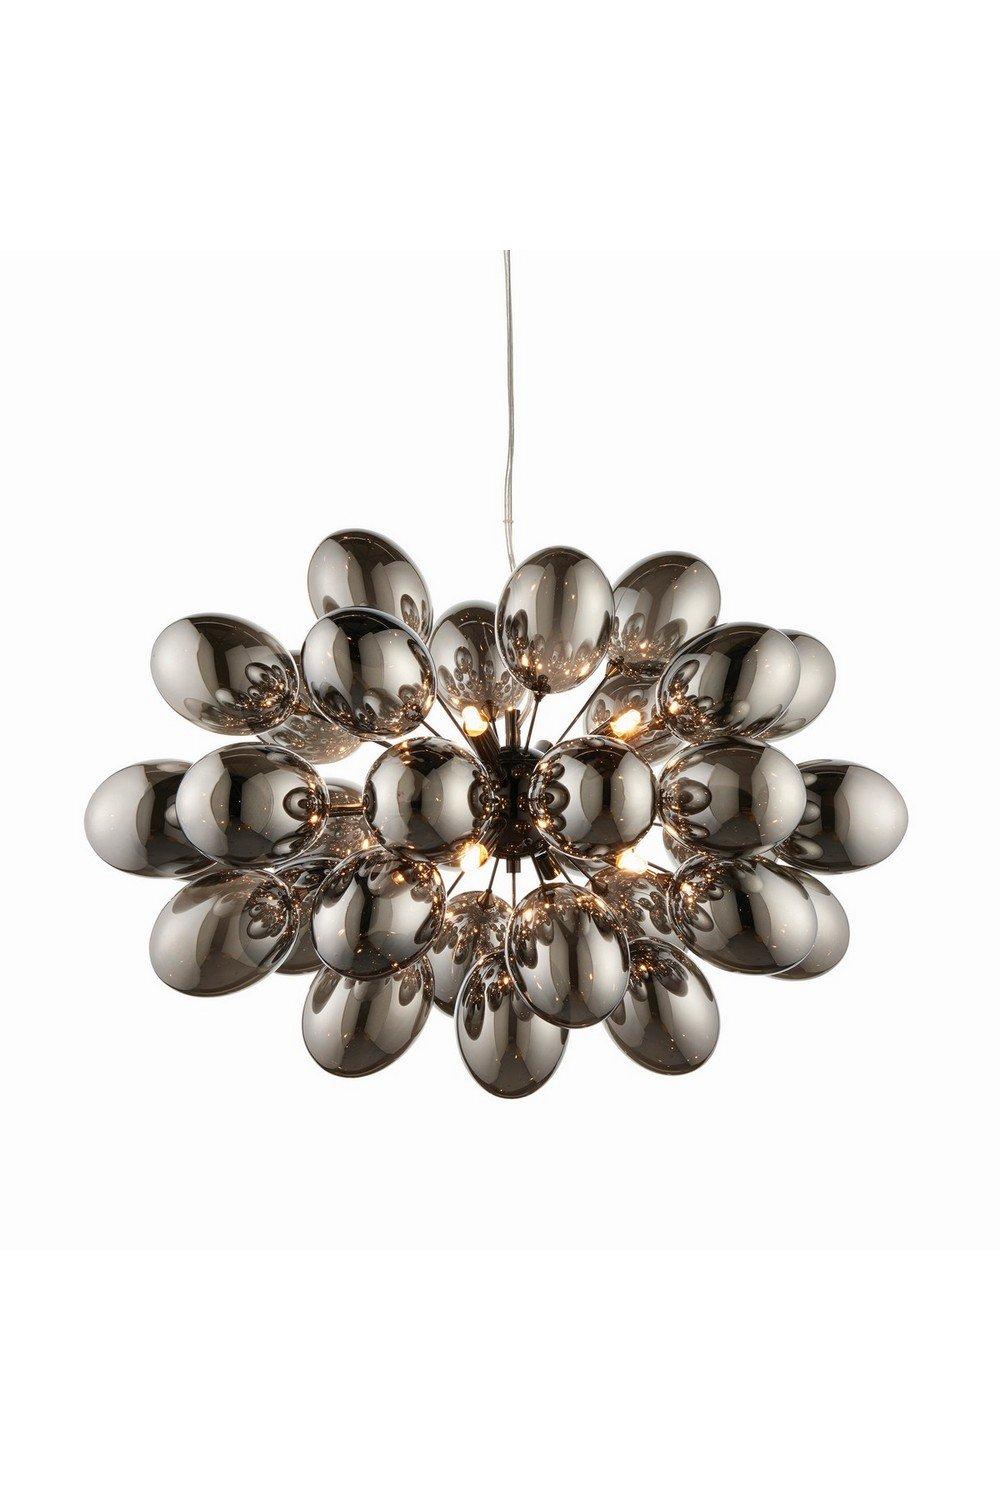 Infinity Pendant Black Chrome Effect Plate & Smokey Mirror Effect Tinted Glass 8 Light Dimmable IP20